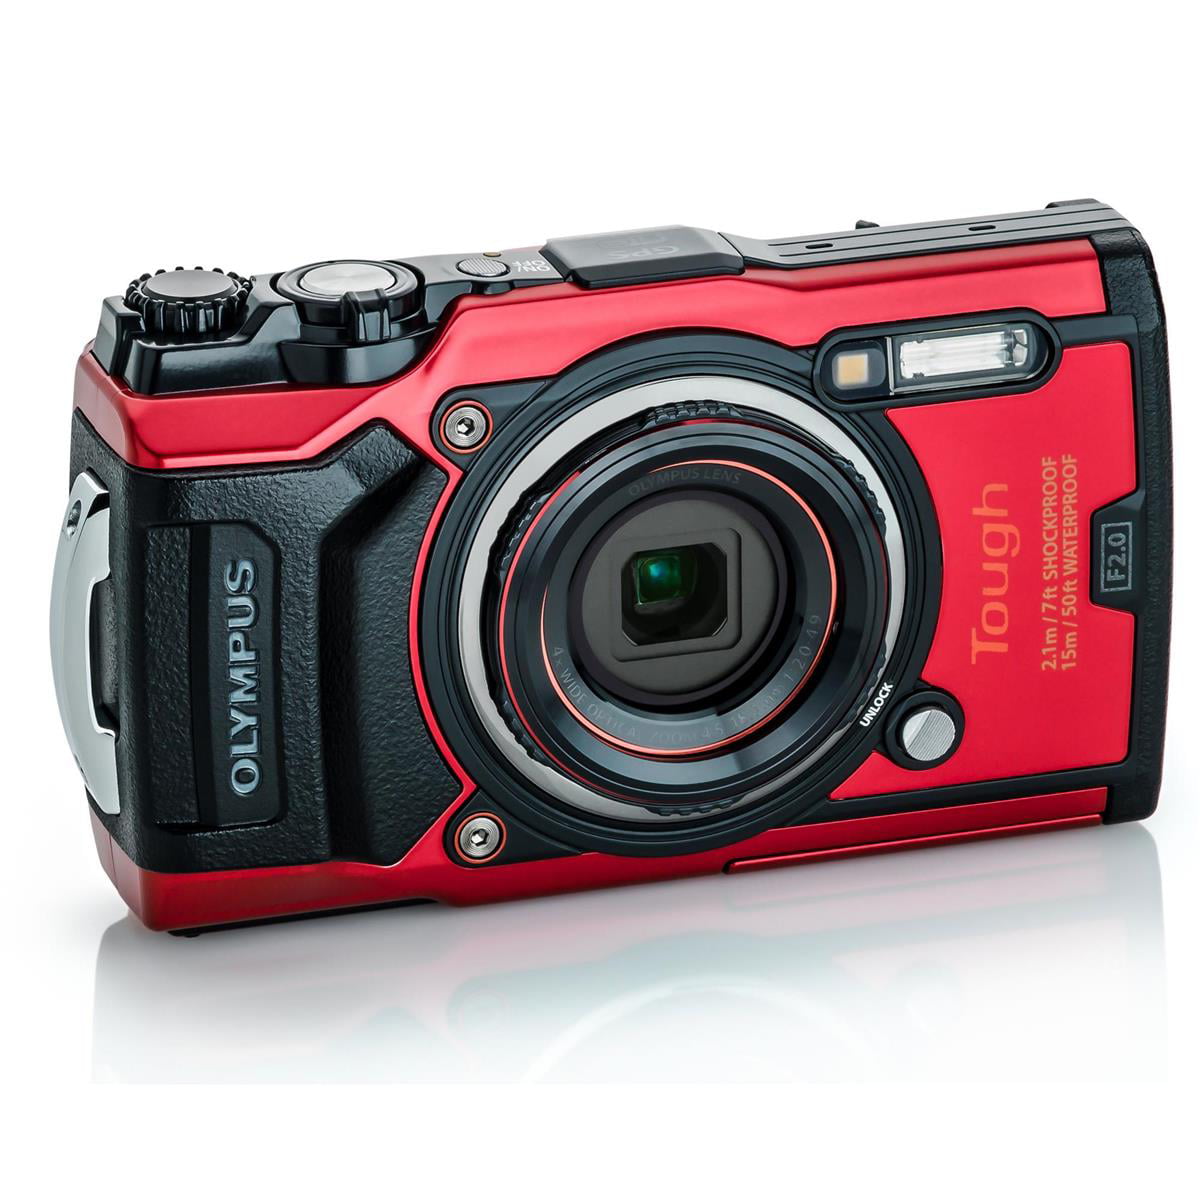 Olympus Tough TG-6 Digital Camera, Red - with Olympus PT-059 Underwater  Housing for TG-6 Cameras, Waterproof to 147 Feet